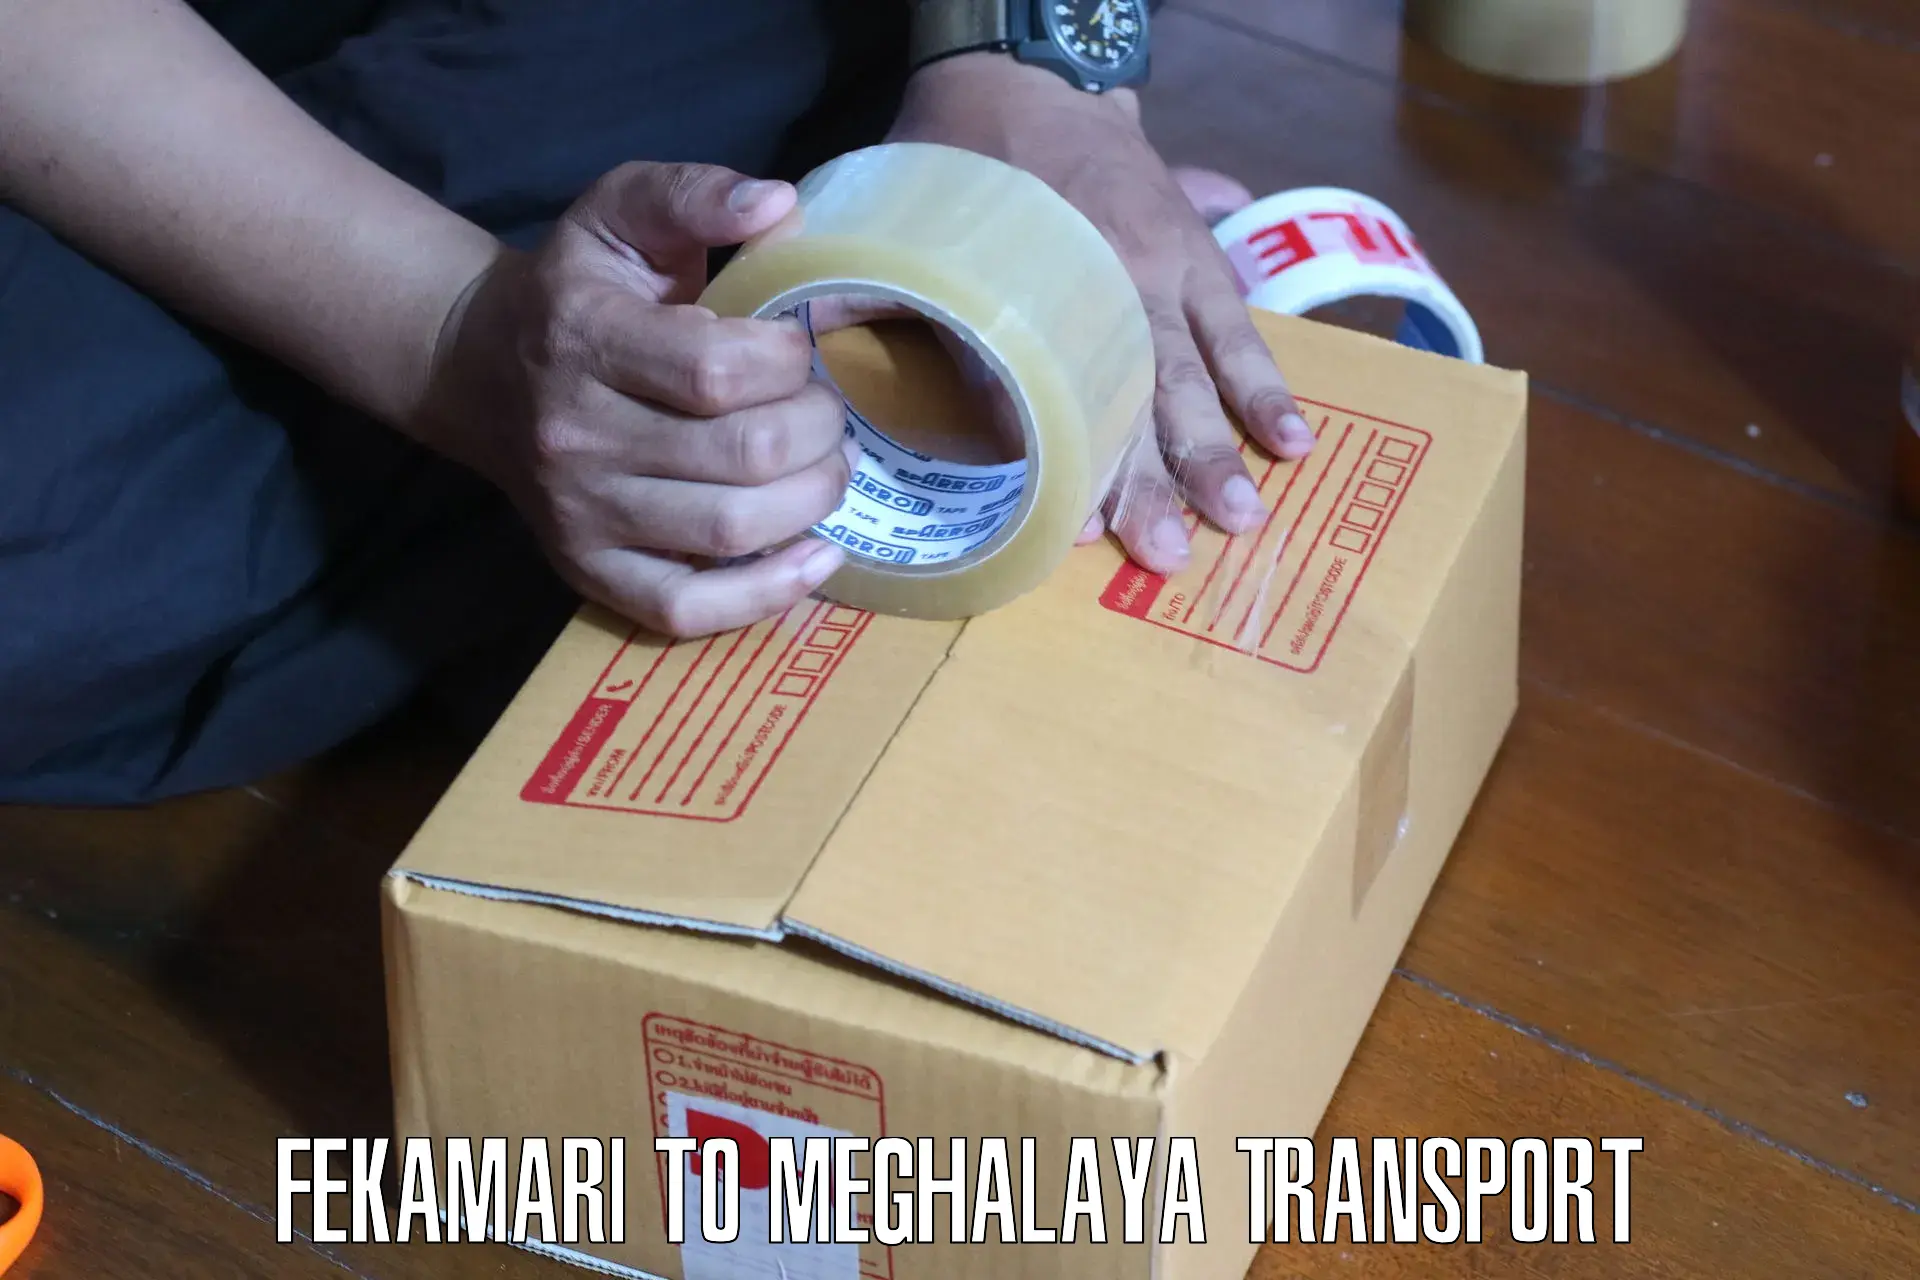 Goods delivery service Fekamari to Dkhiah West